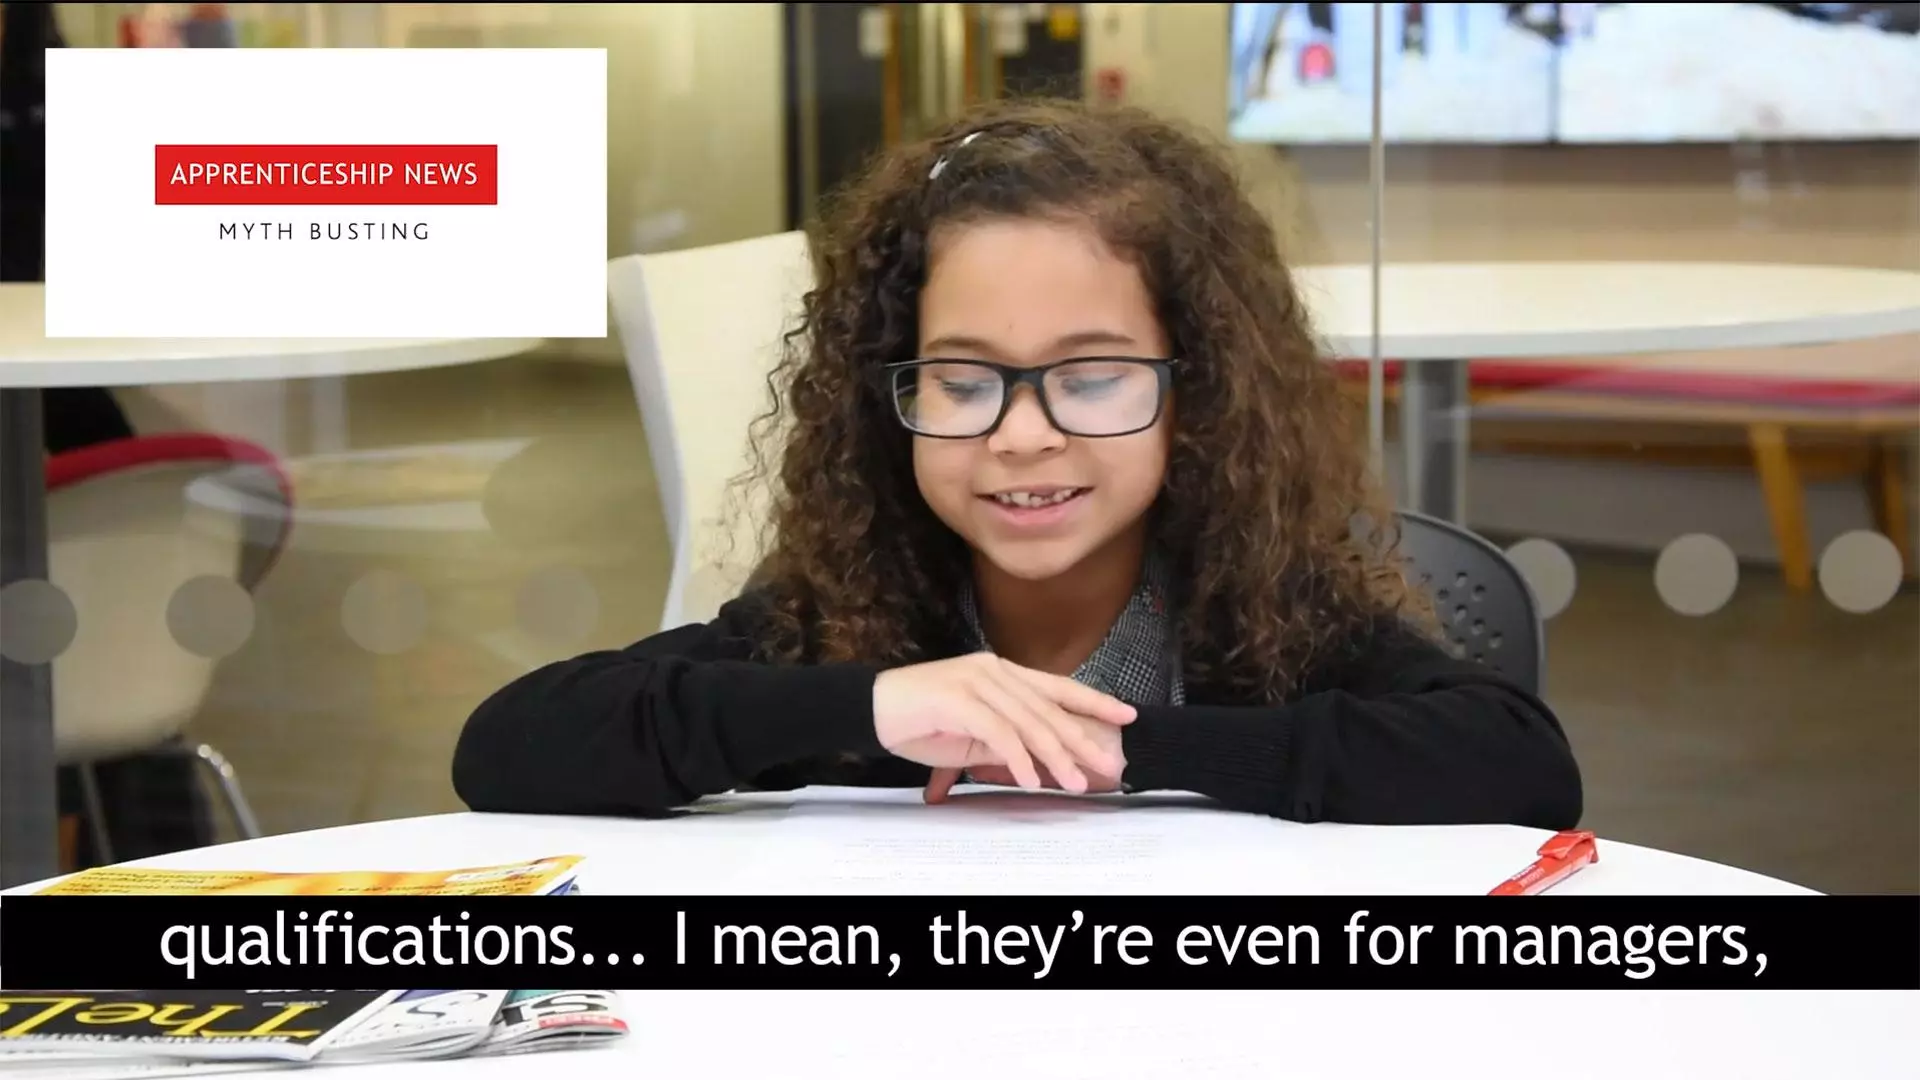 A child explains some of the myths around apprenticeships